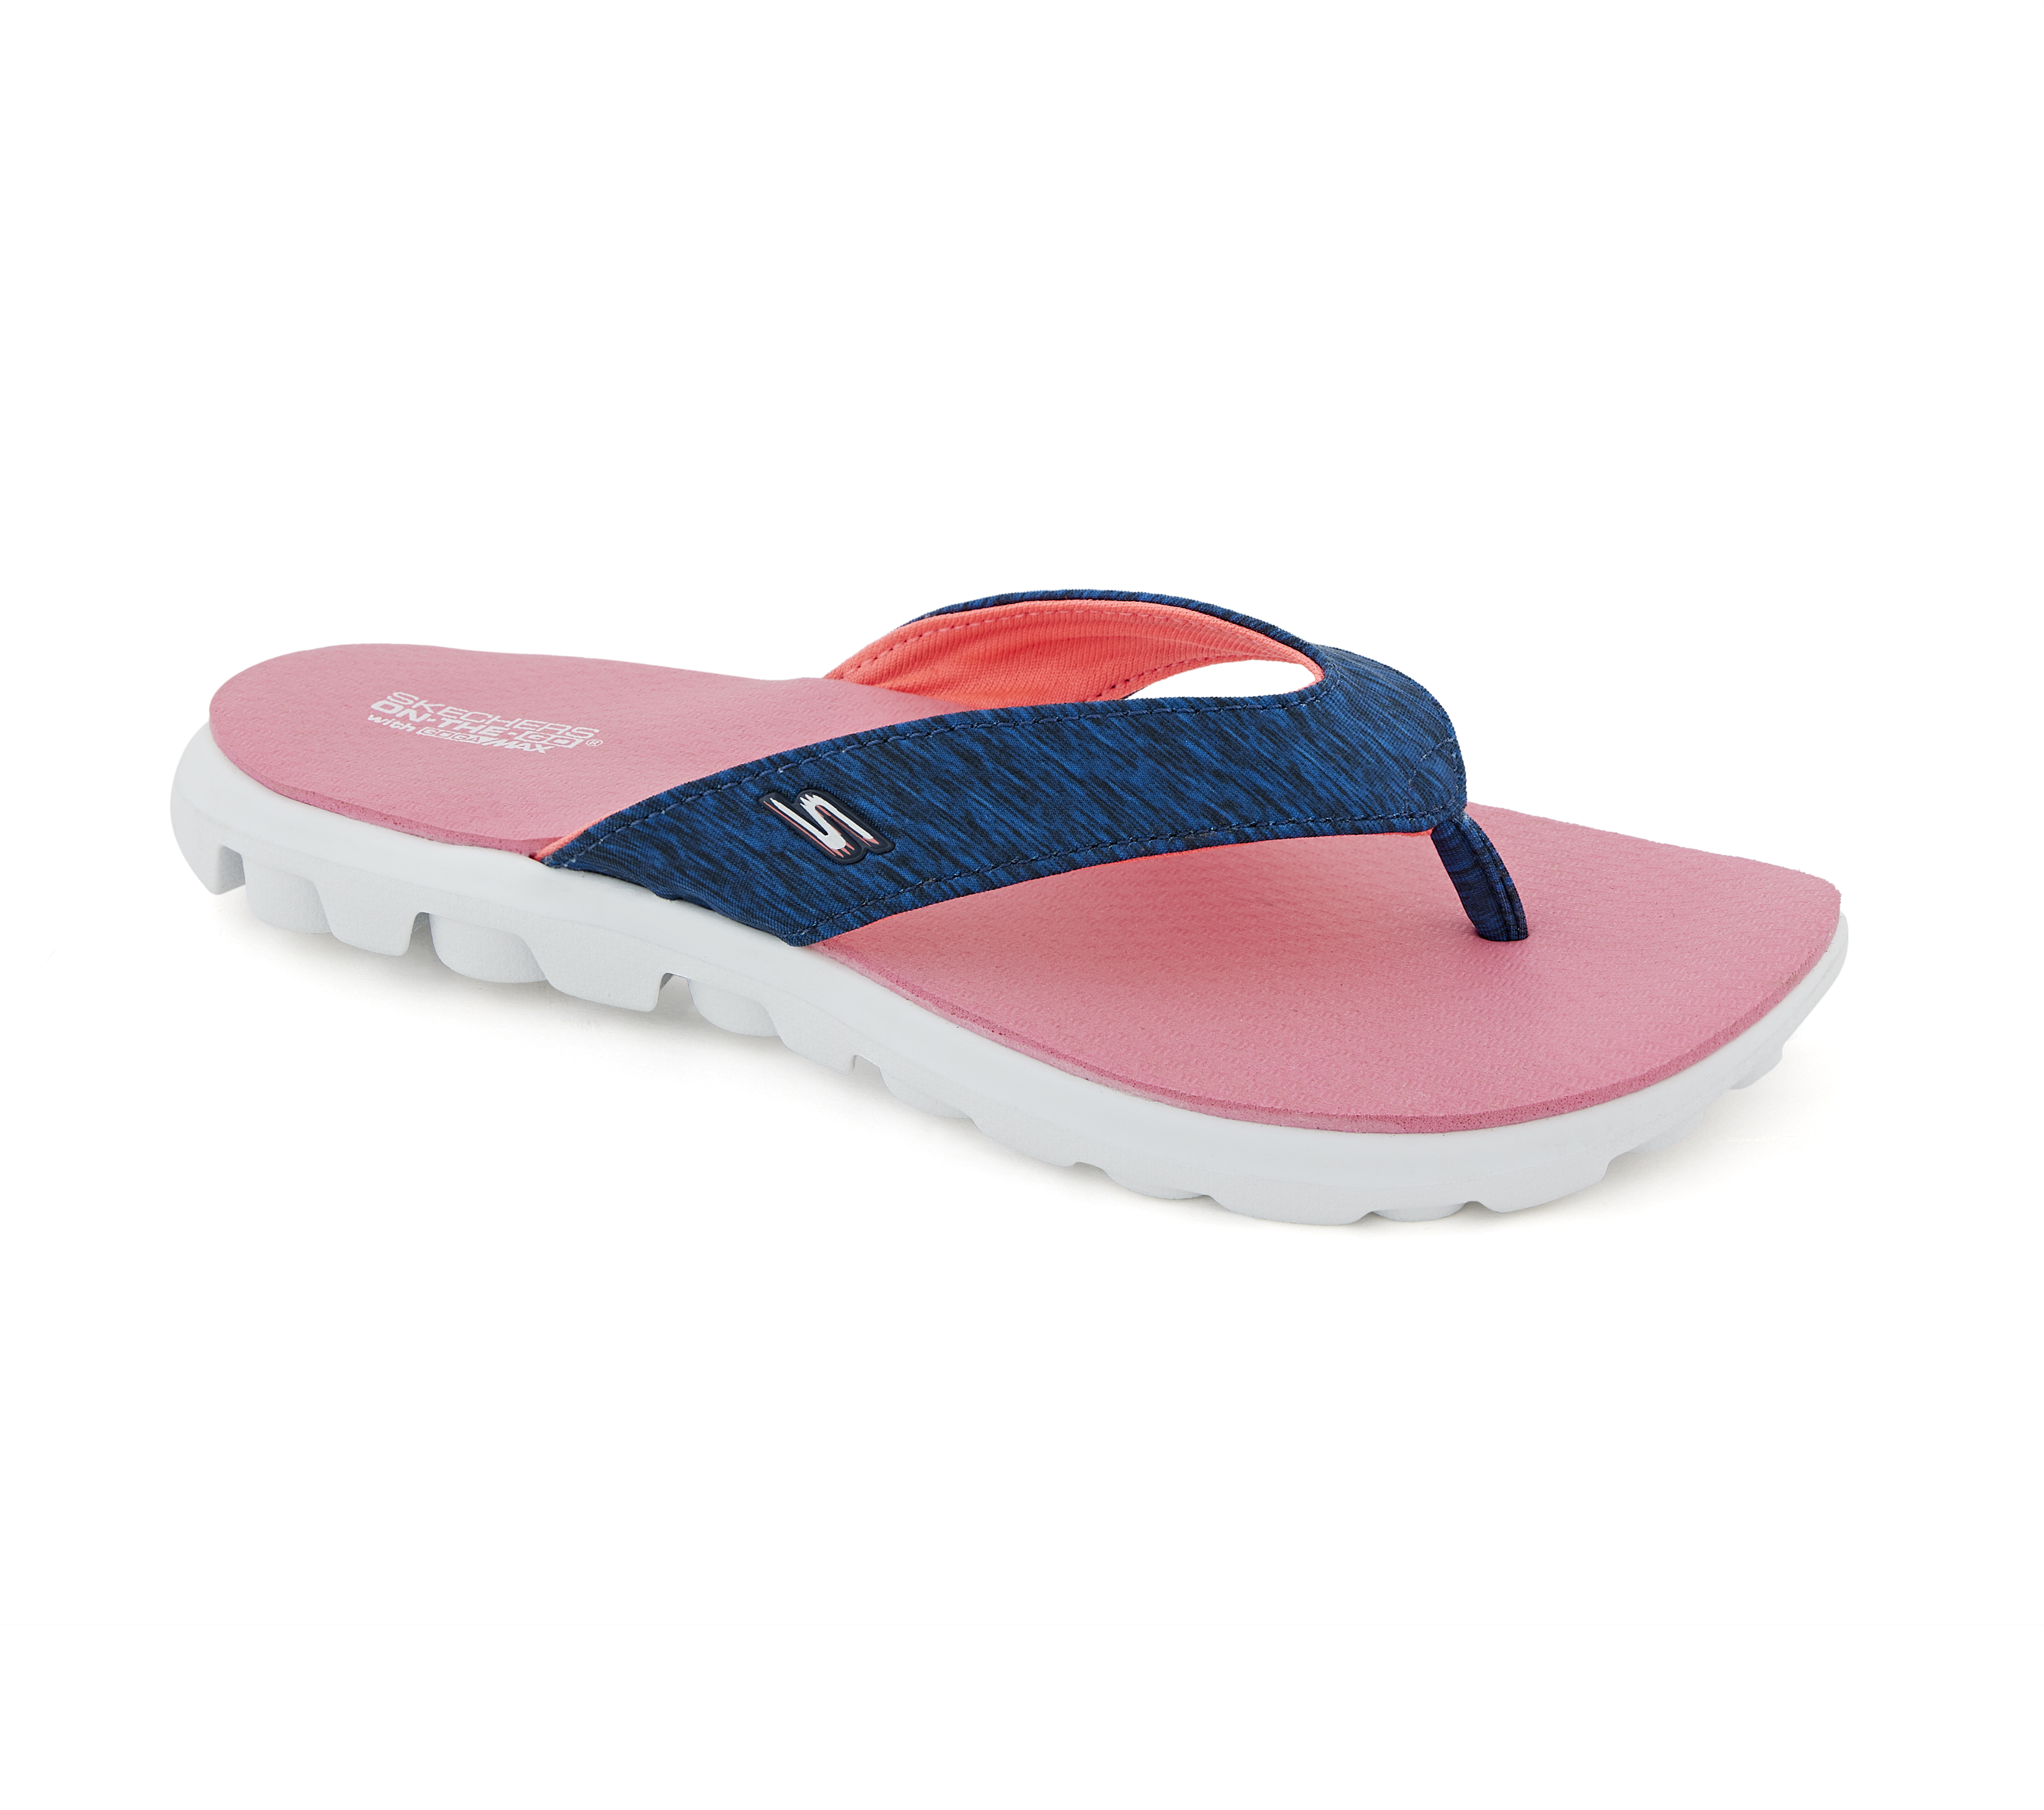 ON-THE-GO - MAUI, NAVY/PINK Footwear Lateral View